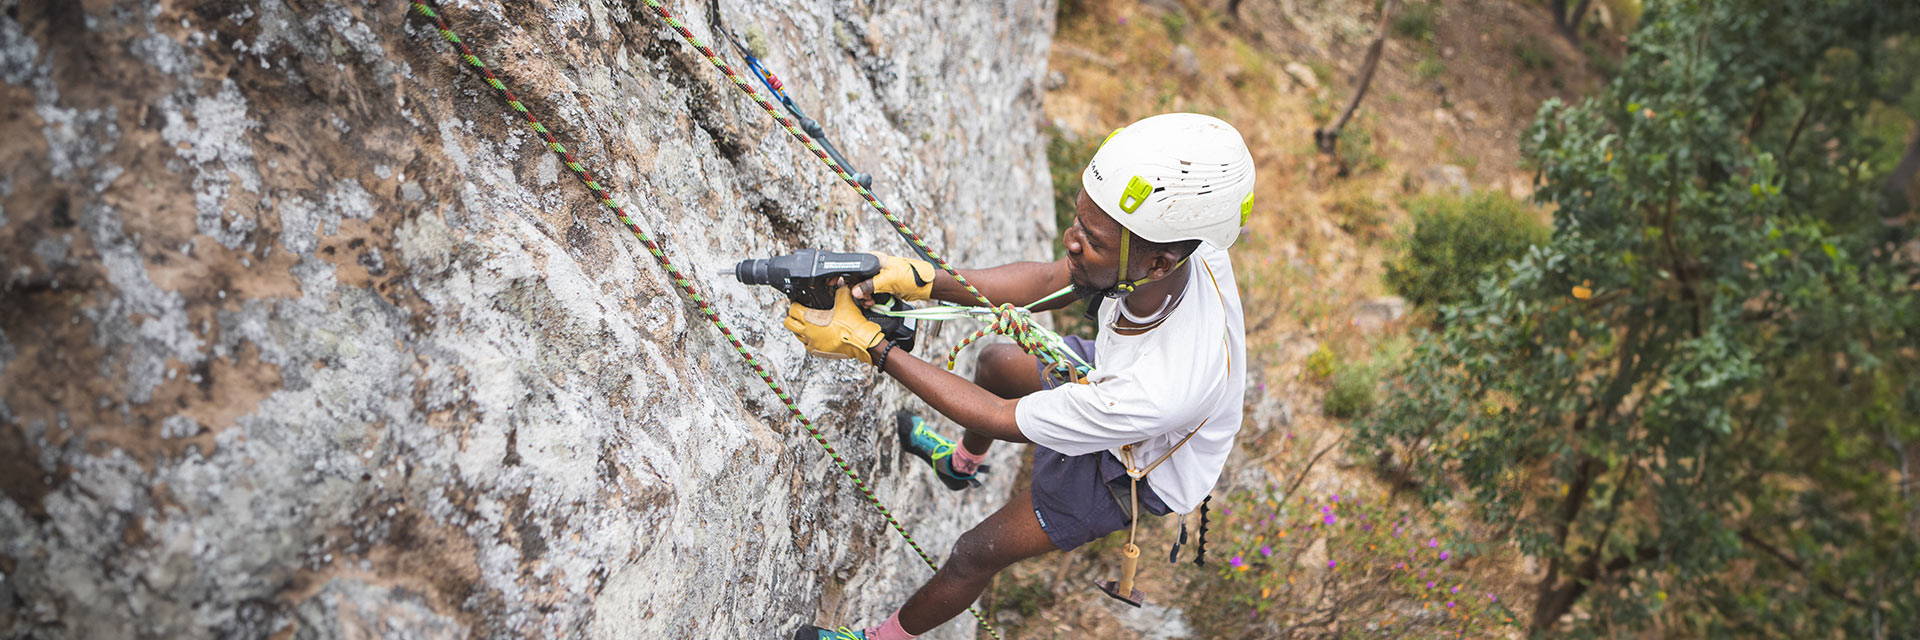 A Malawian climber drills into rock while hanging on a rope to develop a route